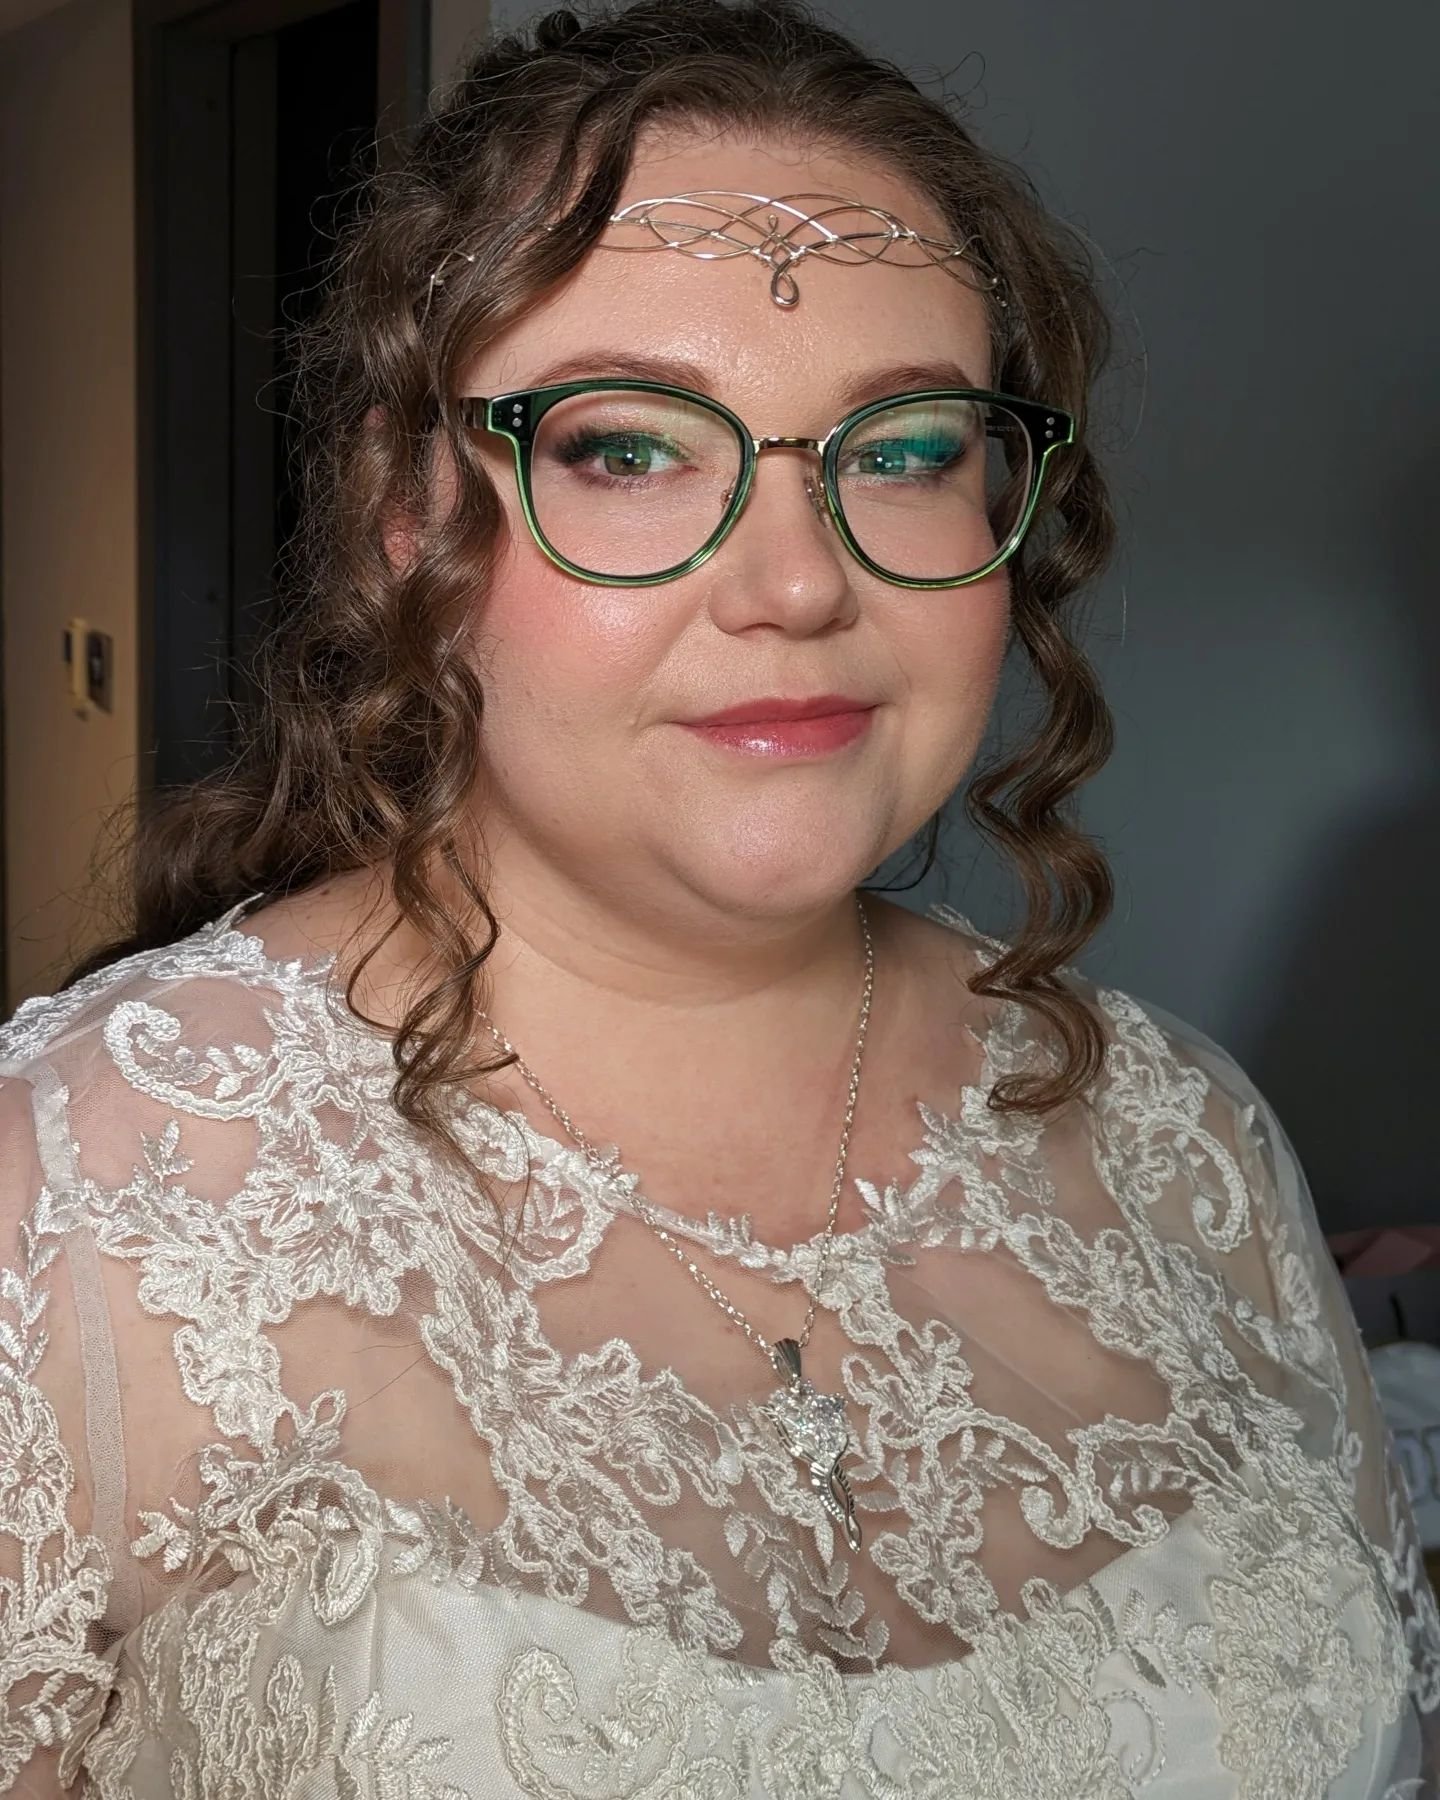 Yesterday's' wedding hair and makeup- and I completely forgot to take a pic of Dora's hairstyle! 

Kept her natural curly pattern and made it super Boho with fishtail braids and twists. 

She asked me to go darker on her eye makeup too which of cours